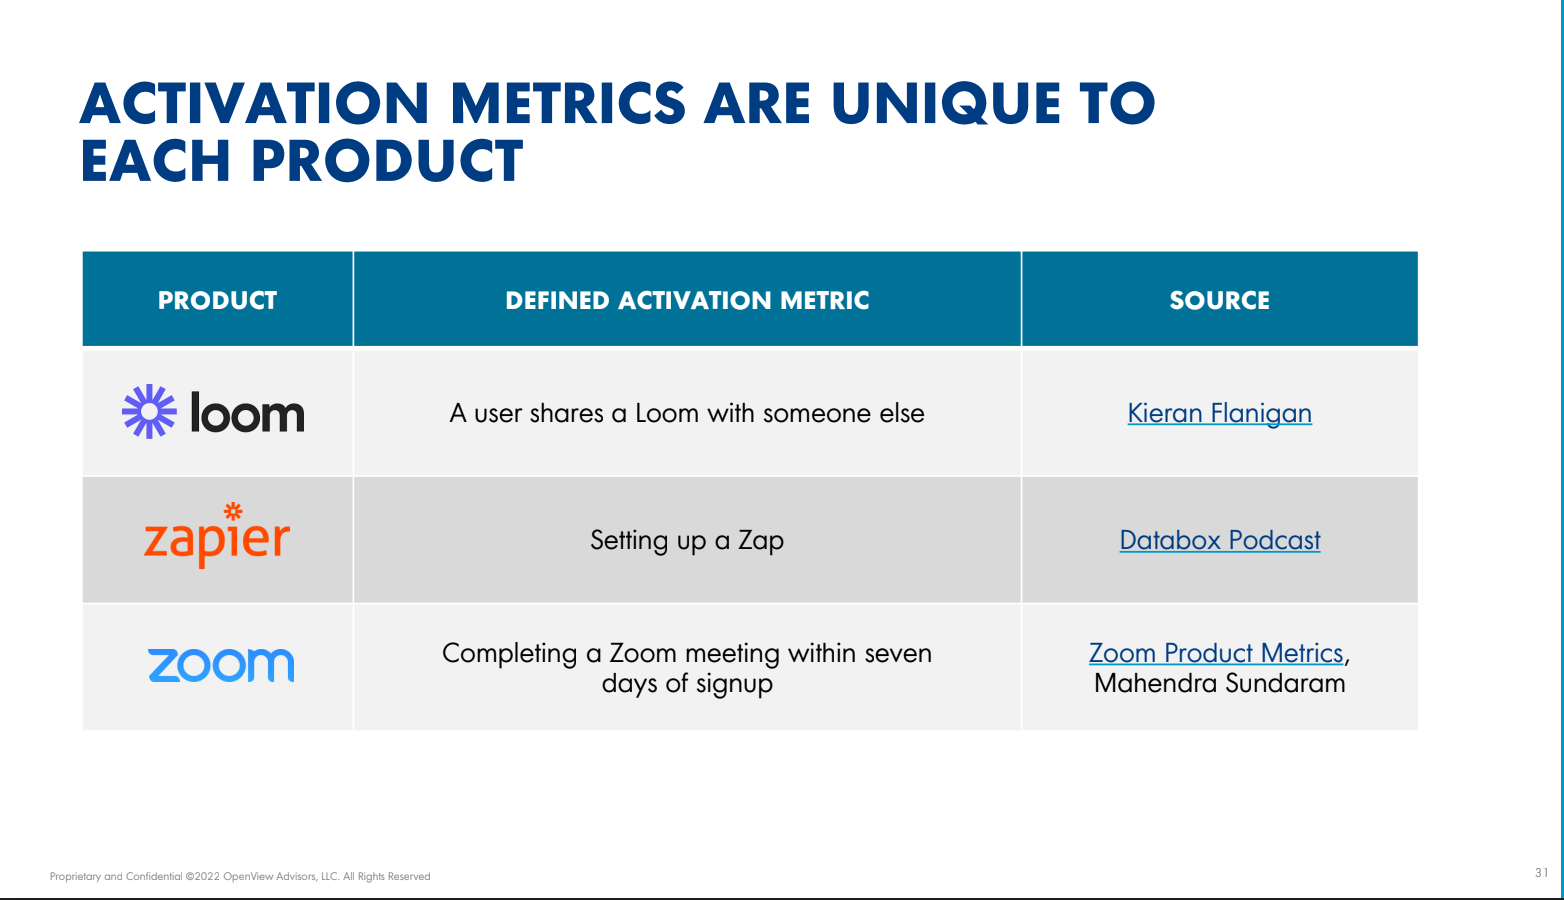 User activation metrics for products